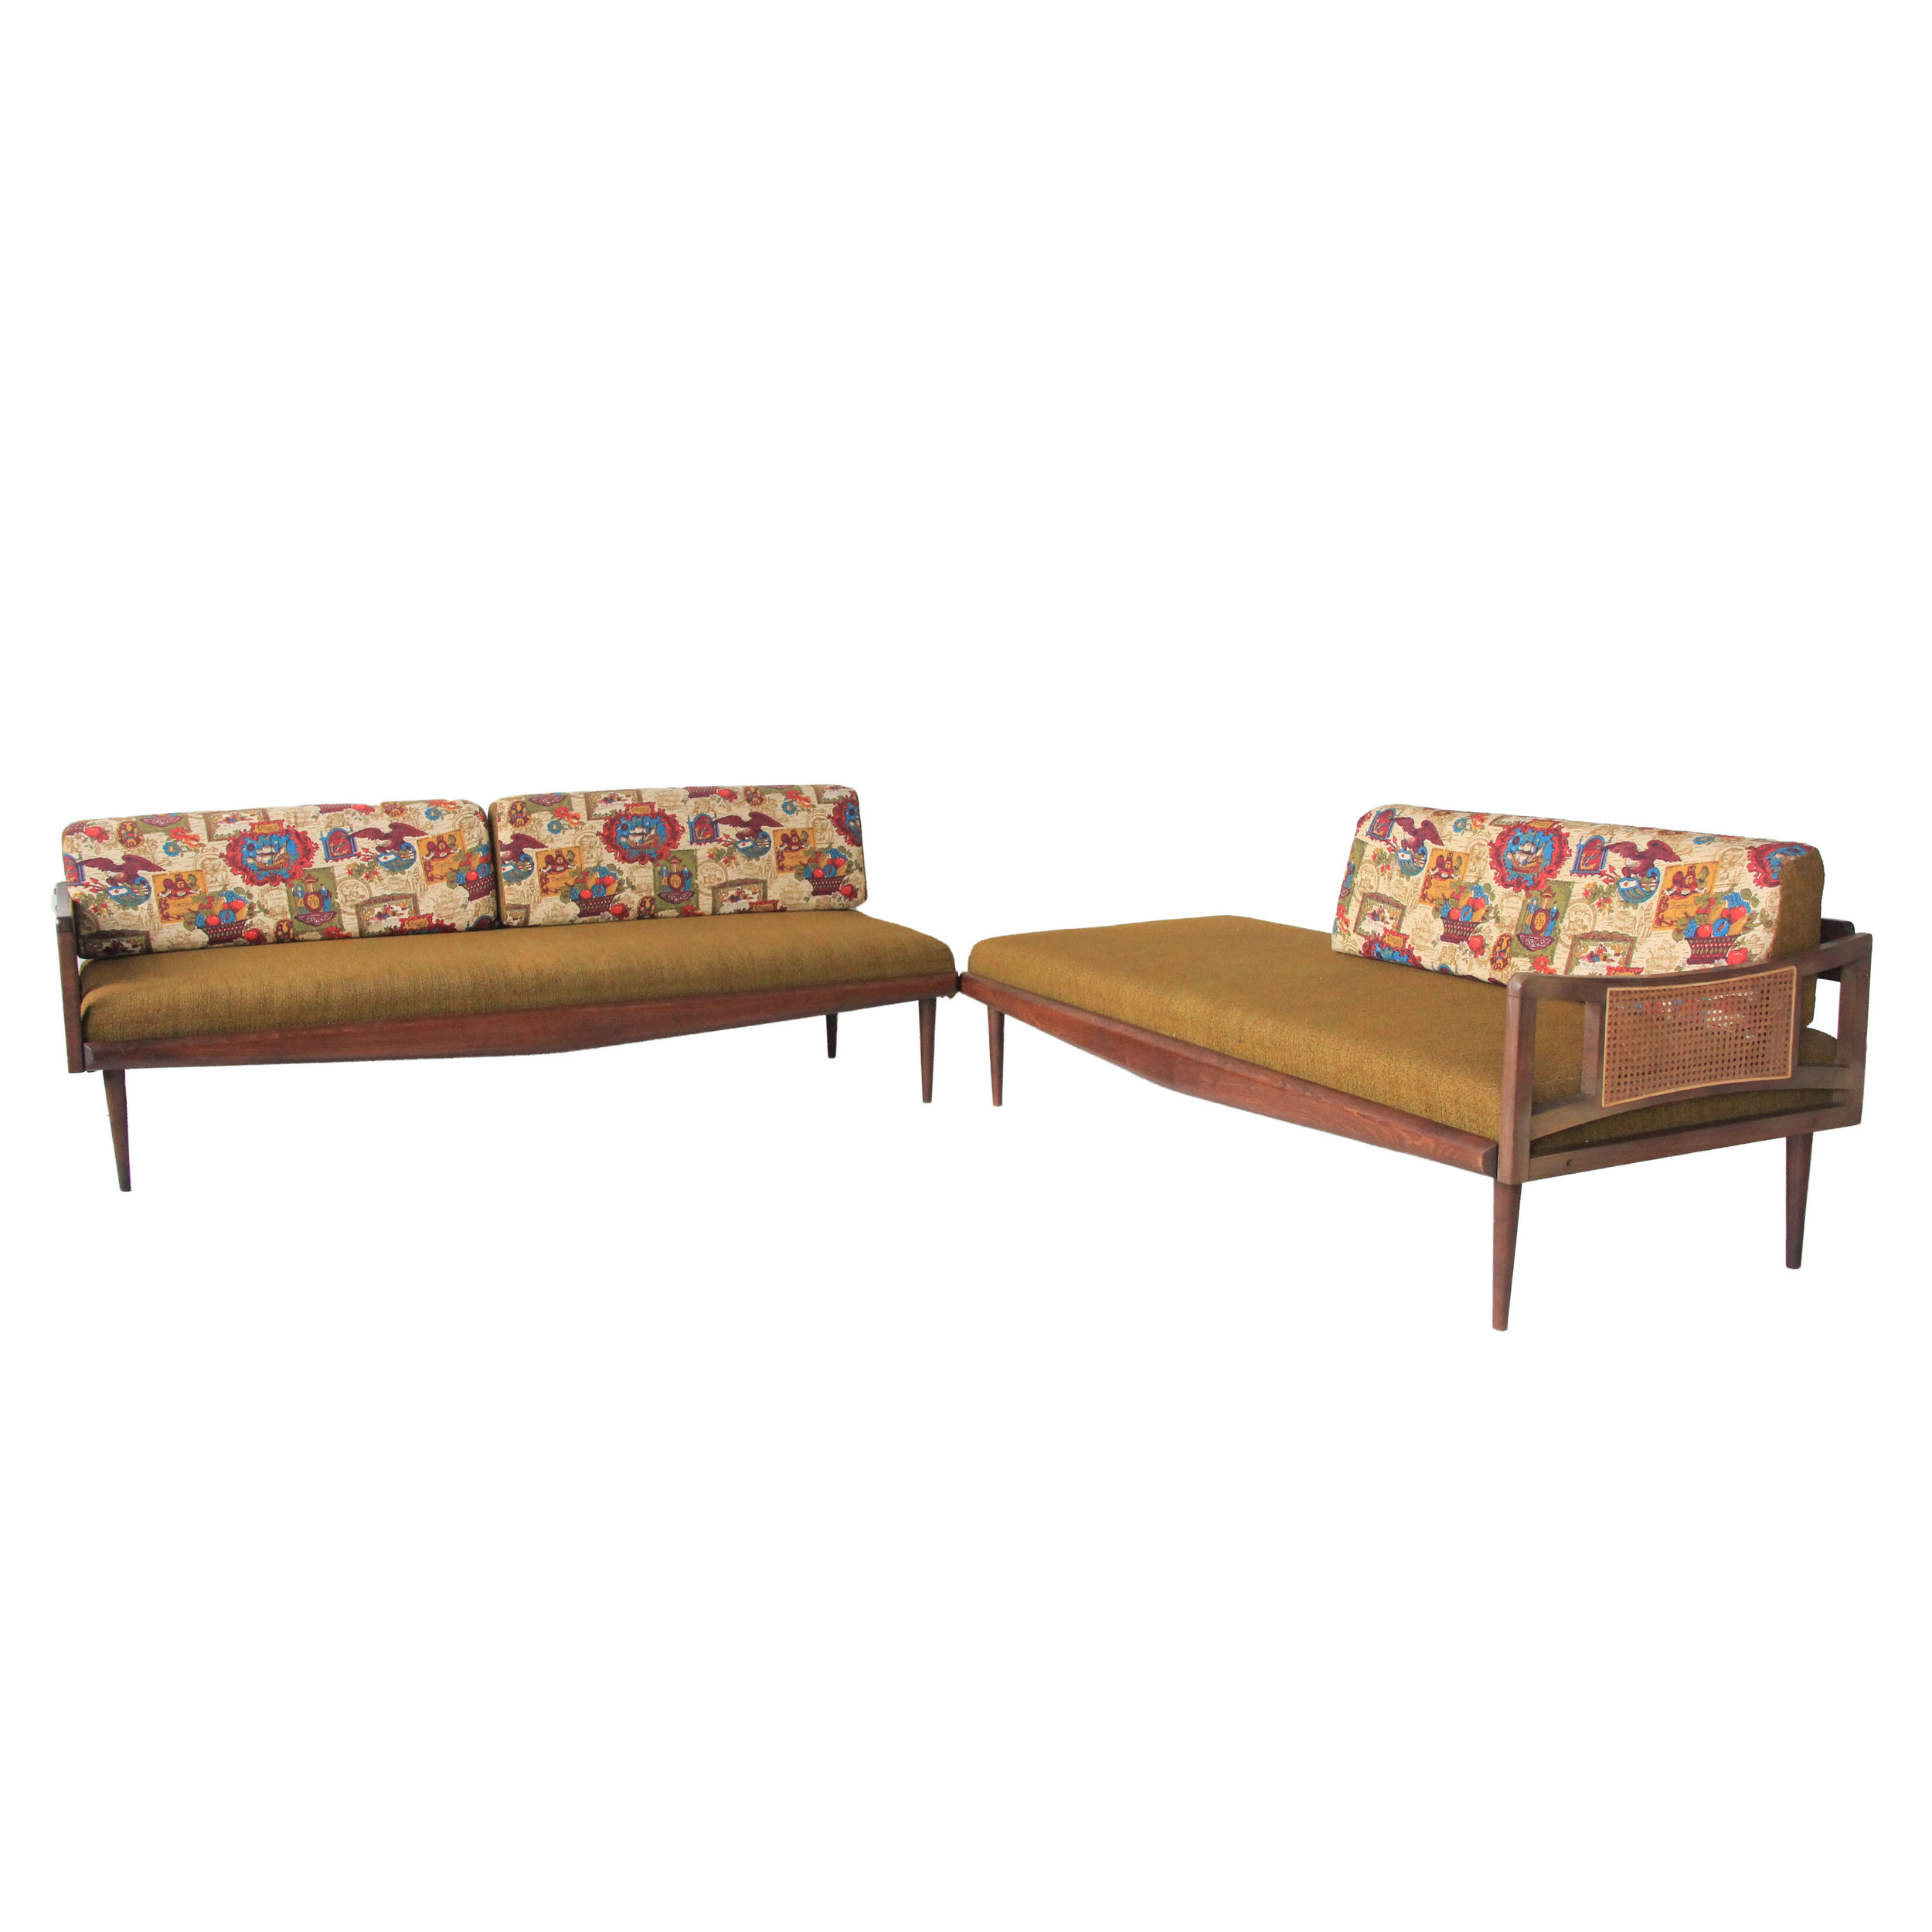 vintage green mid century modern chaise sectional.jpg